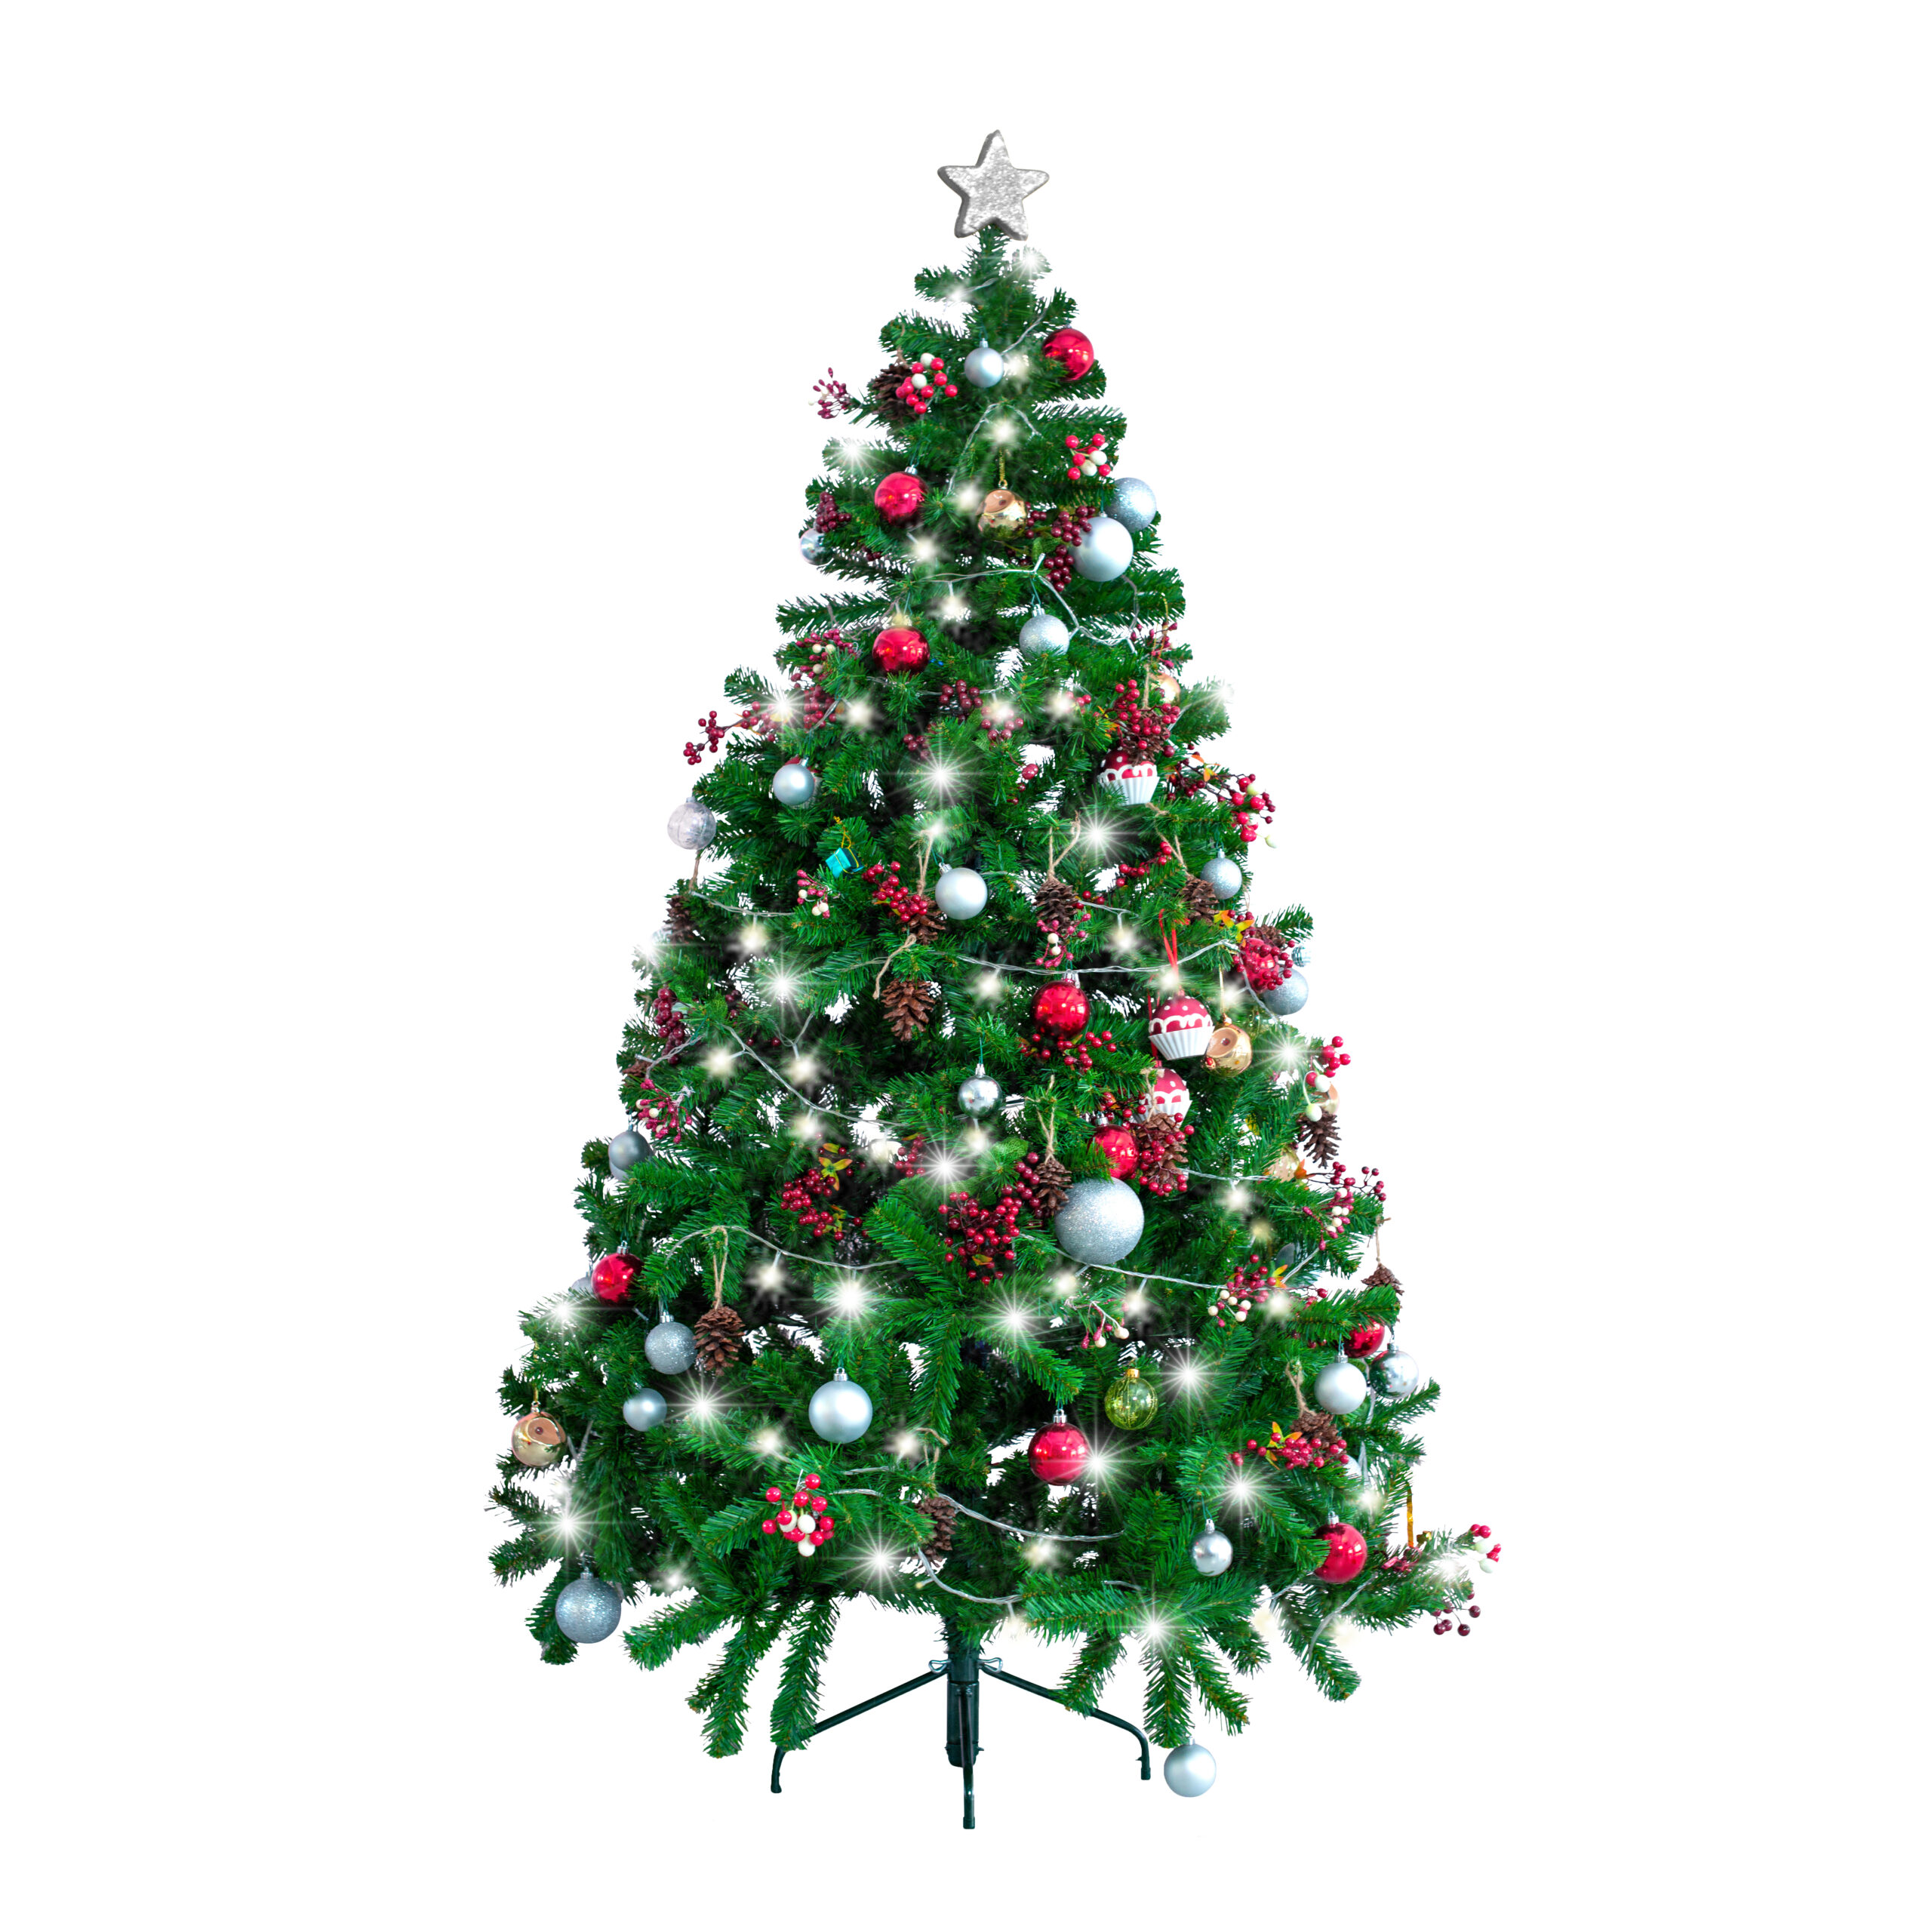 Beautiful,Christmas,Tree,,Full,Length,Image,,Decorated,With,Ornament,,Balls